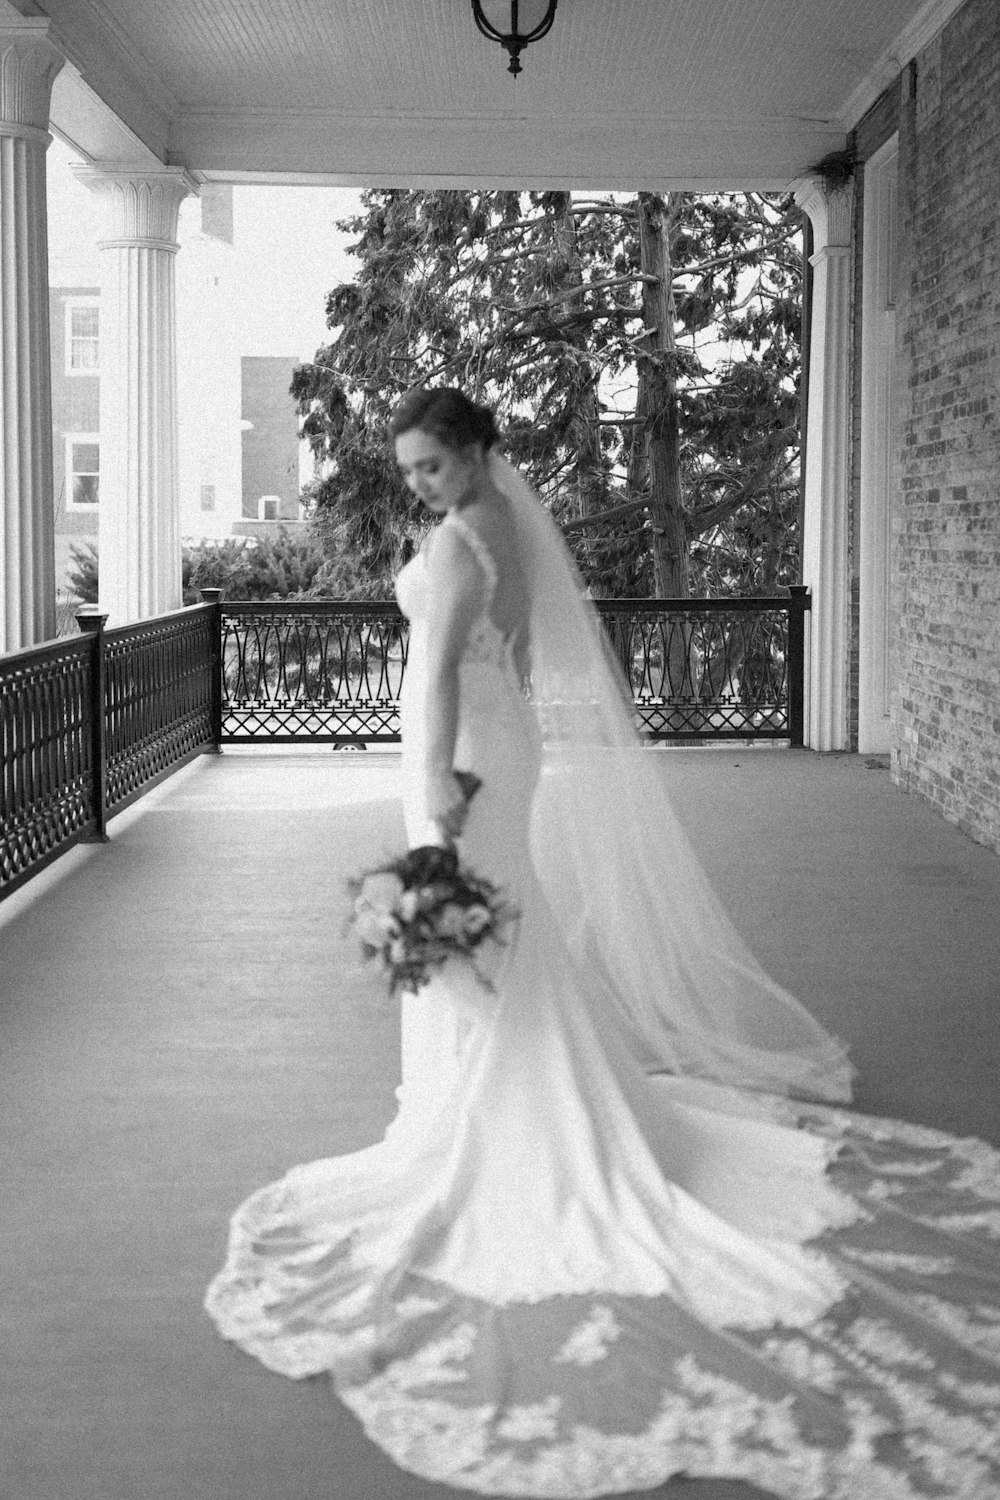 a woman in a wedding dress standing on a porch